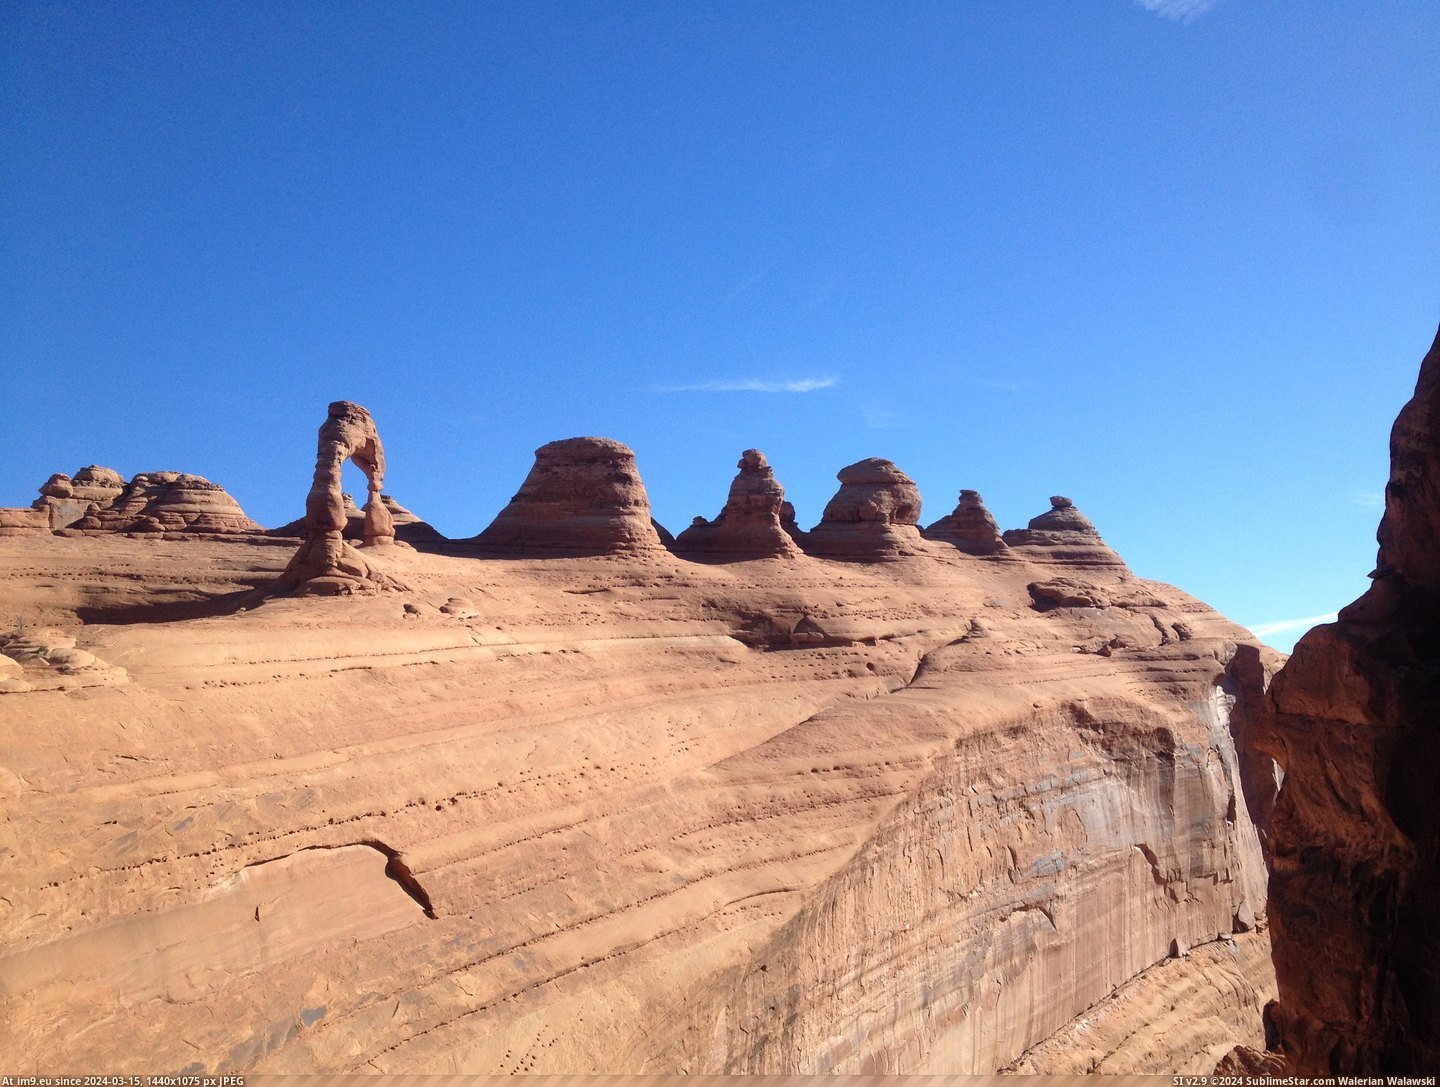 #Park #National #Arch #Delicate #Arches #3264x2448 #Utah [Earthporn] Delicate Arch at Arches National Park, Utah. [3264x2448] Pic. (Image of album My r/EARTHPORN favs))